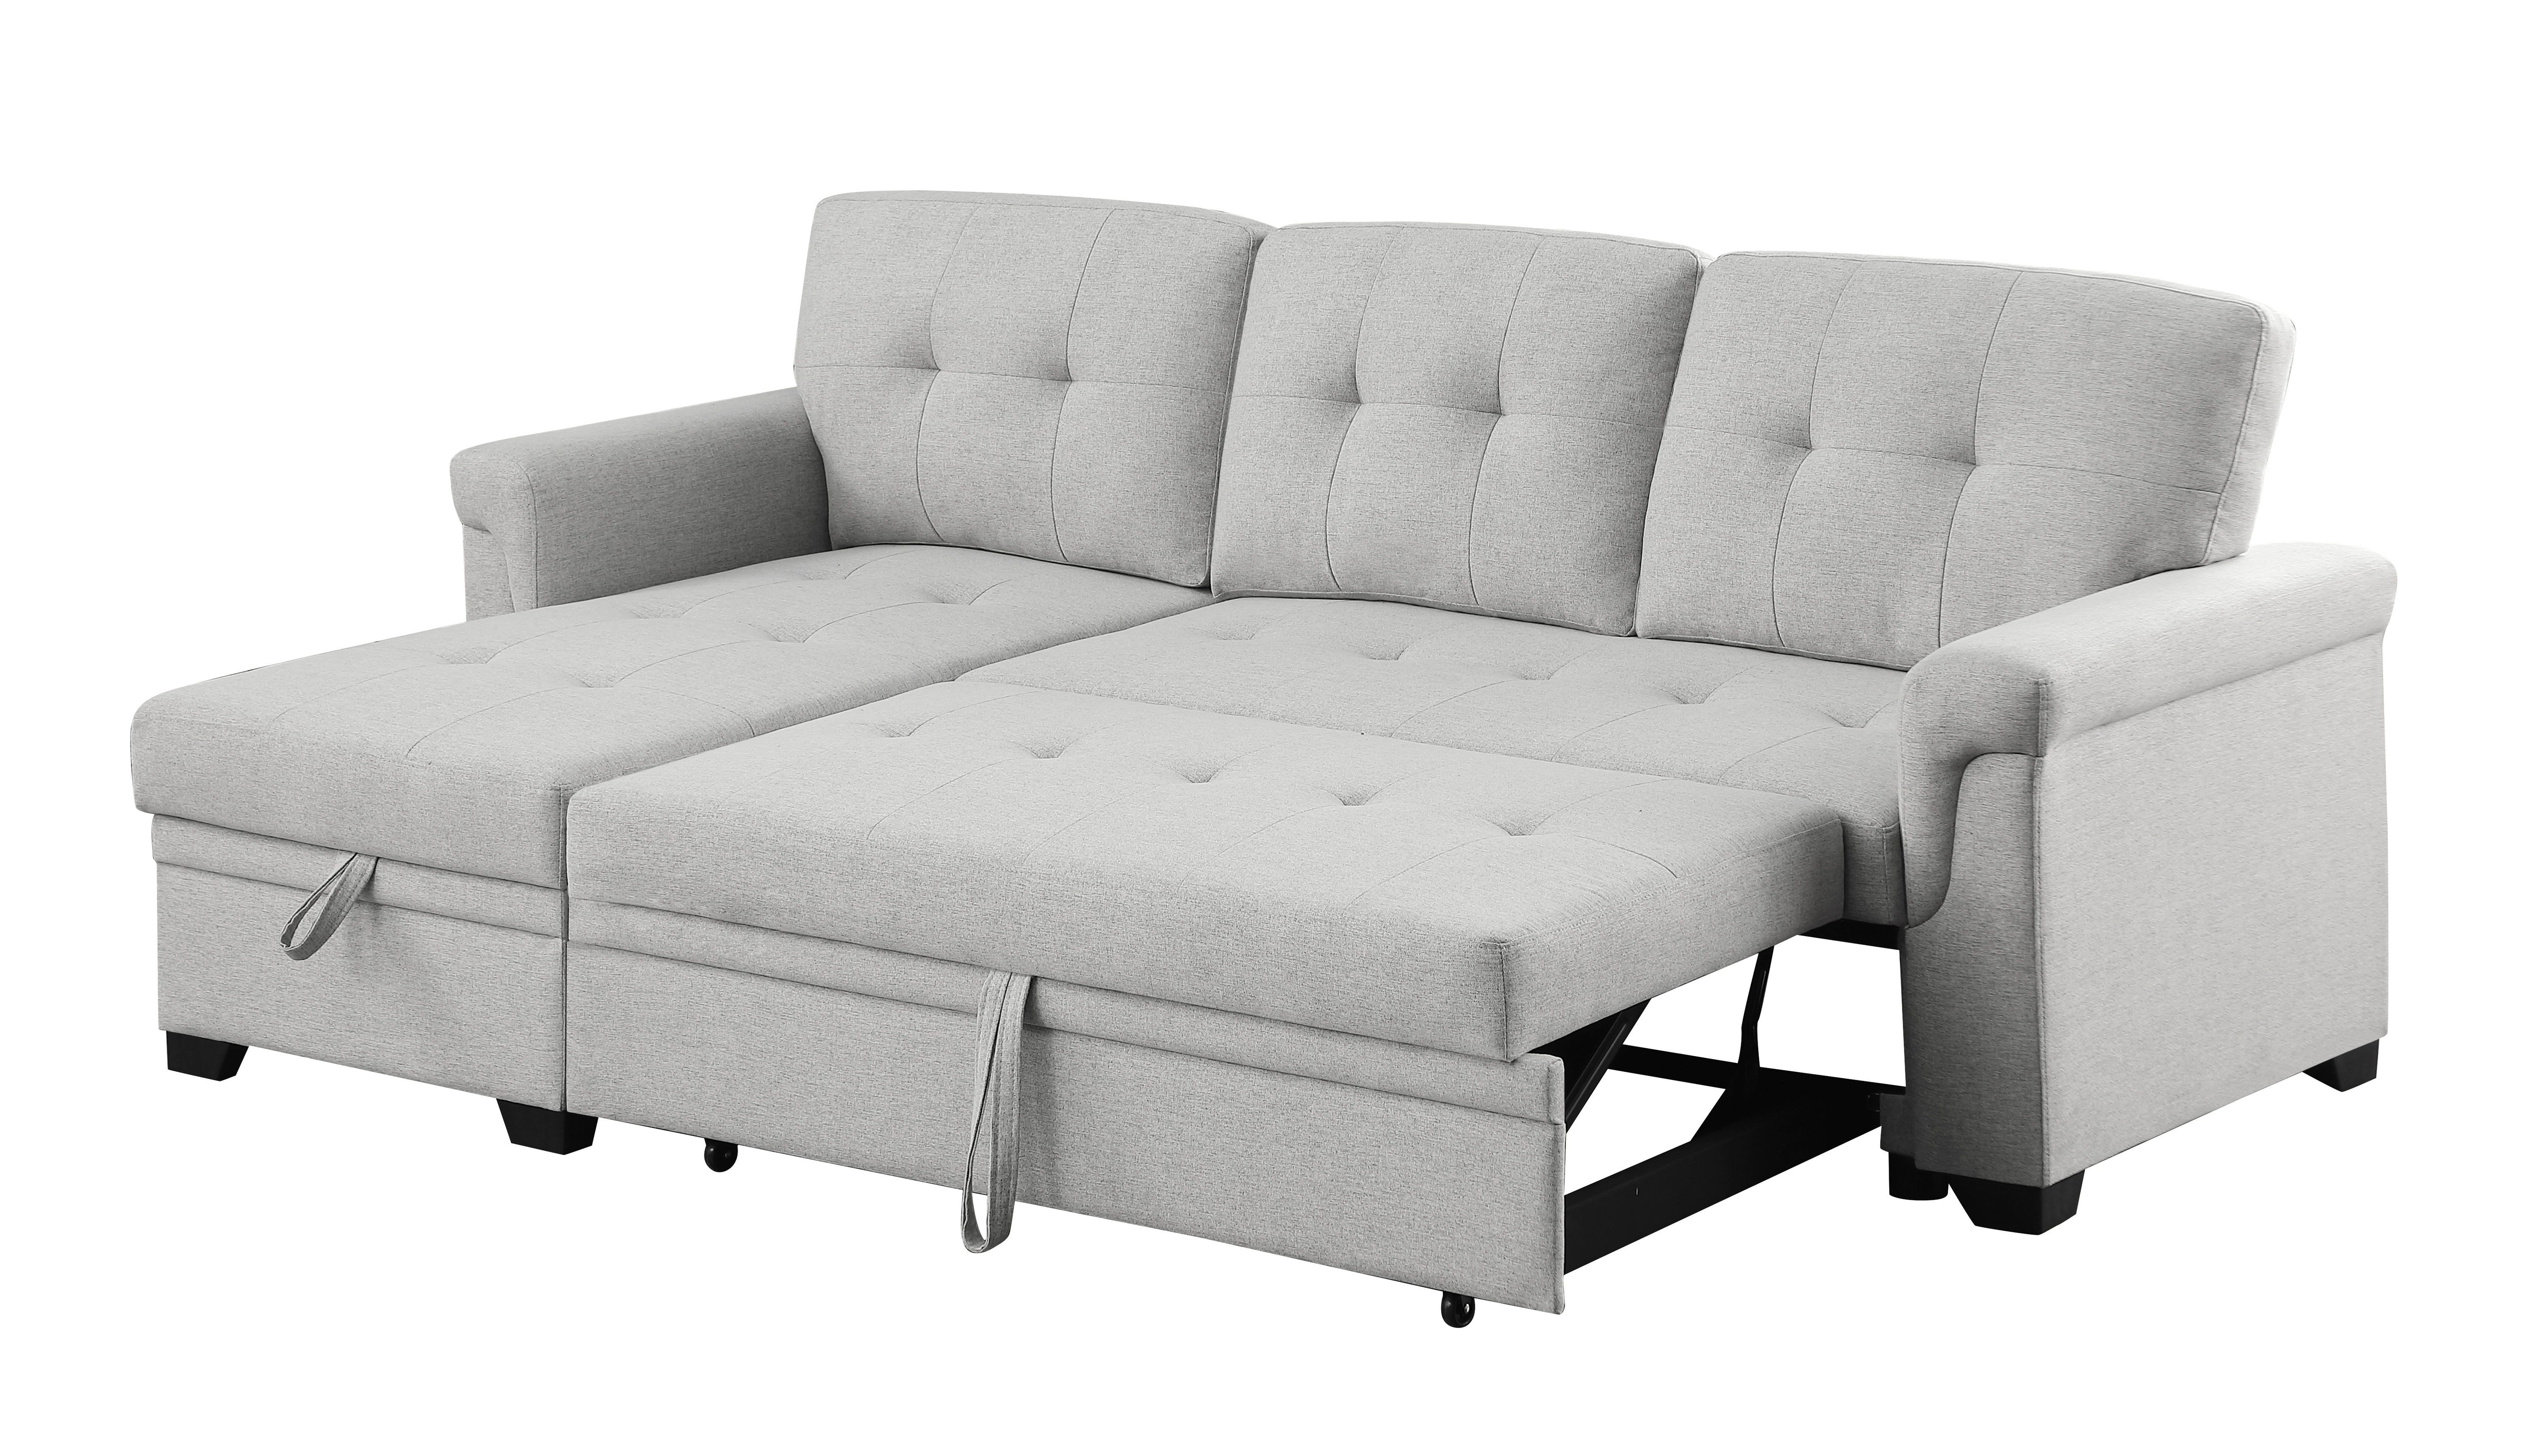 Sierra - Linen Reversible Sleeper Sectional Sofa With Storage Chaise